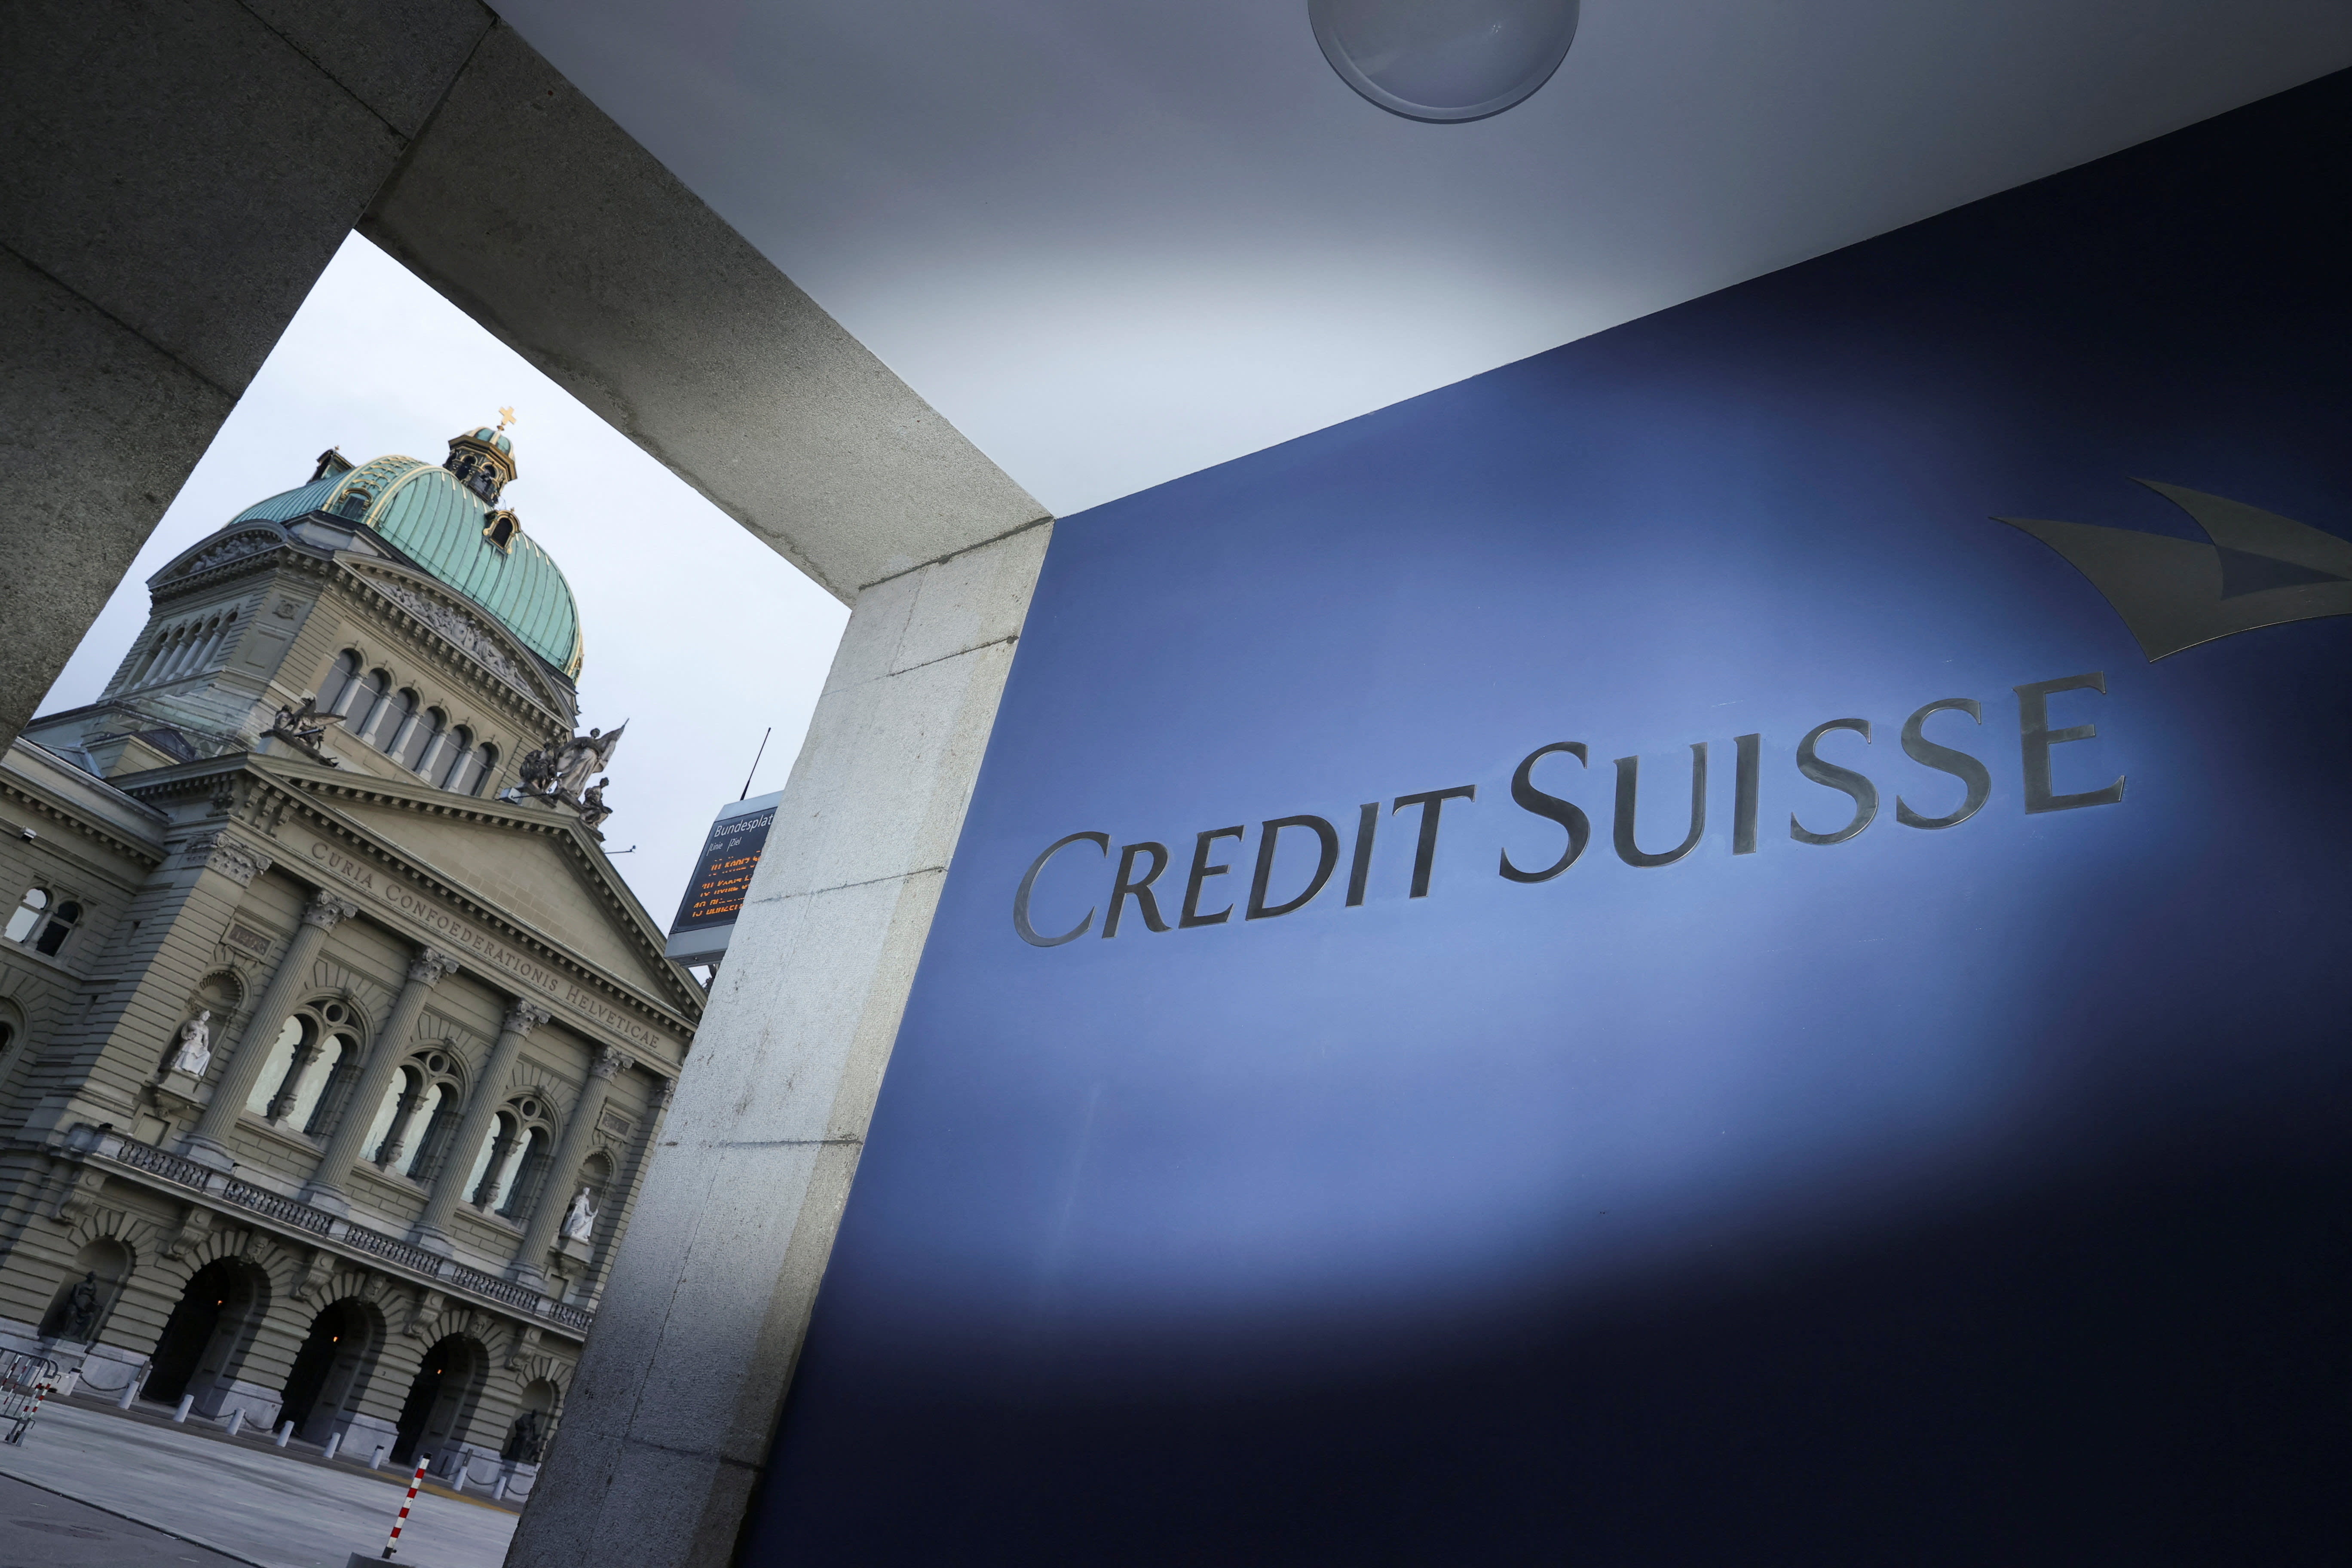 Credit Suisse: What we know so far